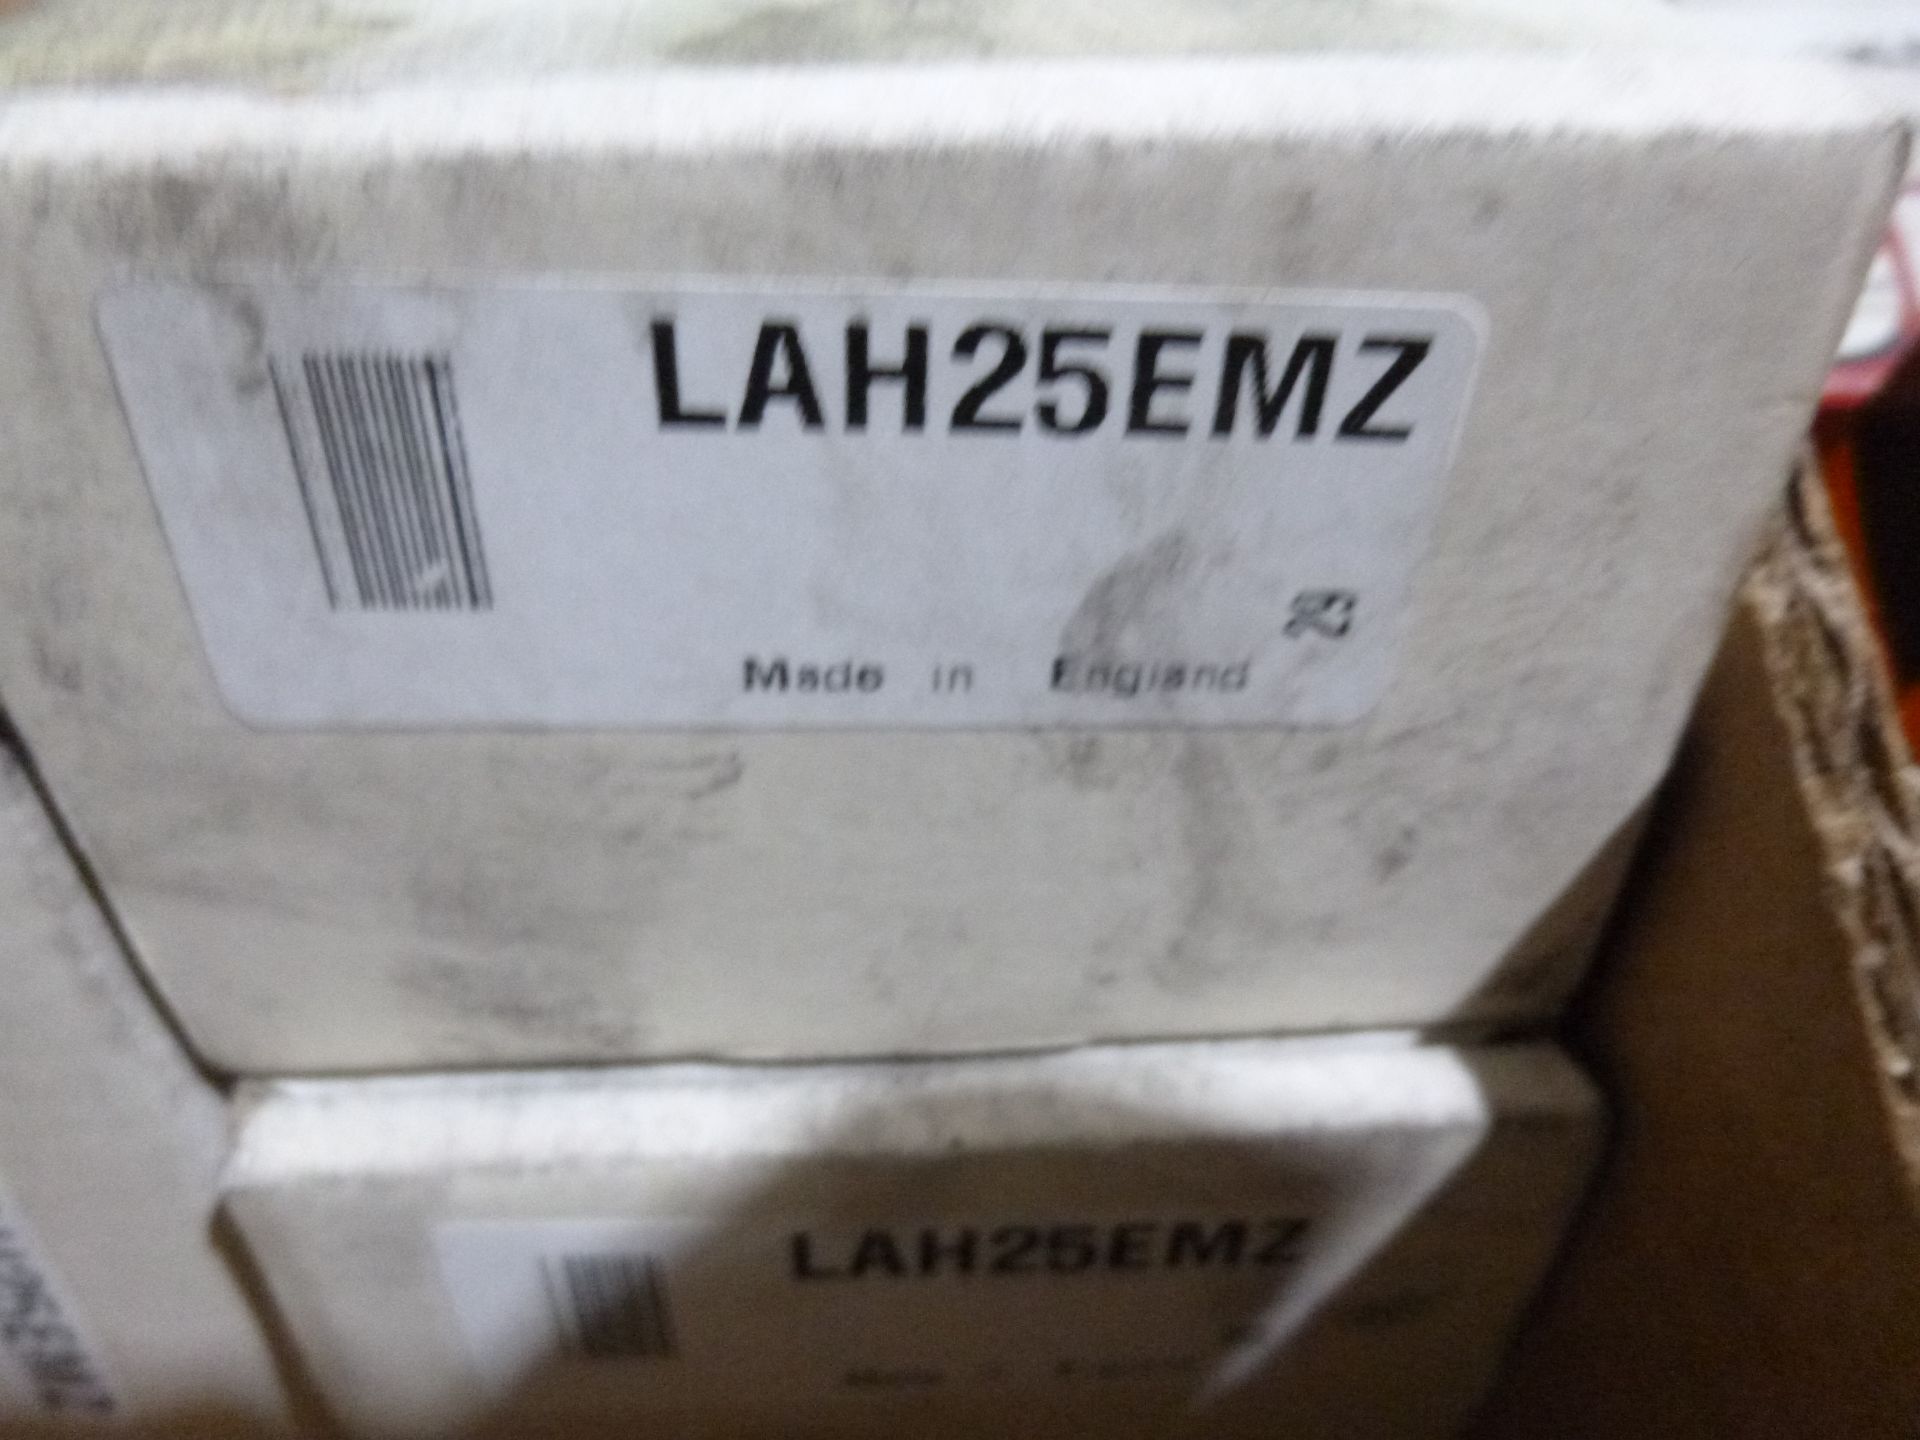 Qty 3 NSK linear slide bearings model LAH25EMZ, new in boxes, as always with Brolyn LLC auctions, - Image 2 of 2